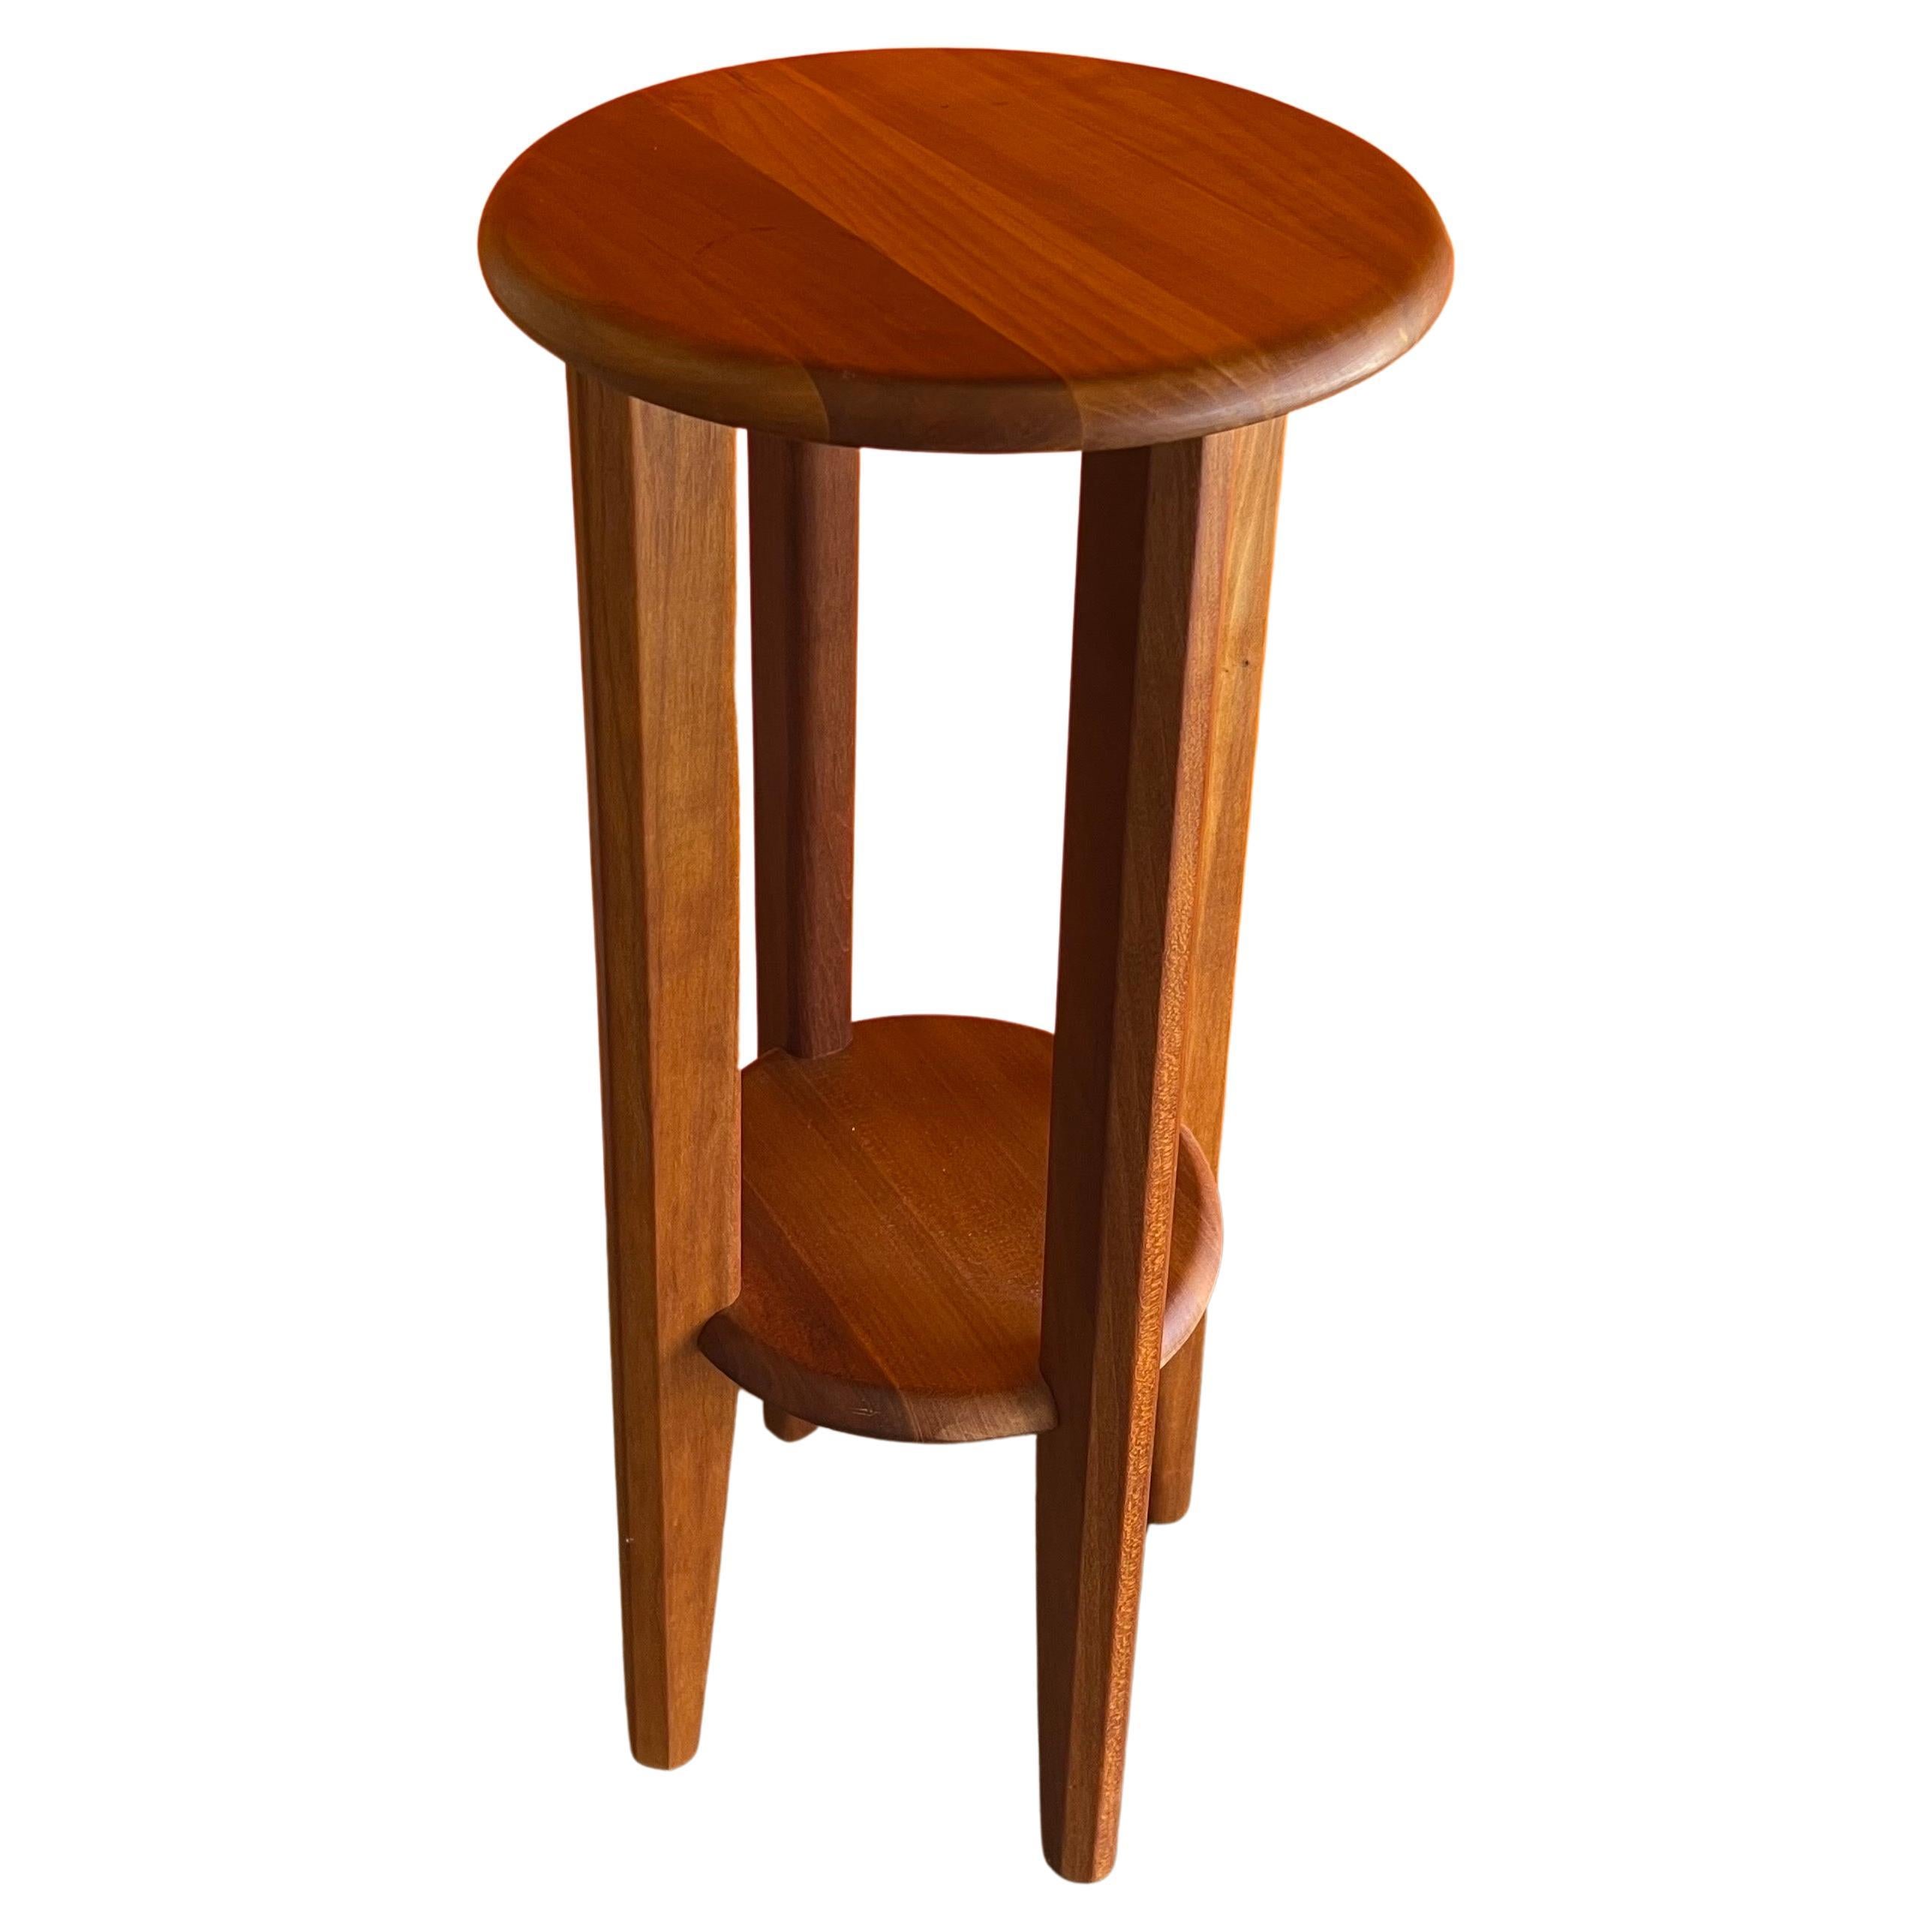 Danish modern petite teak side table / plant stand by Ansbarger Møbler, circa 1970s. This small table has beautiful wood grain with excellent detailing and craftsmanship. The table is in very good vintage condition and measures 10